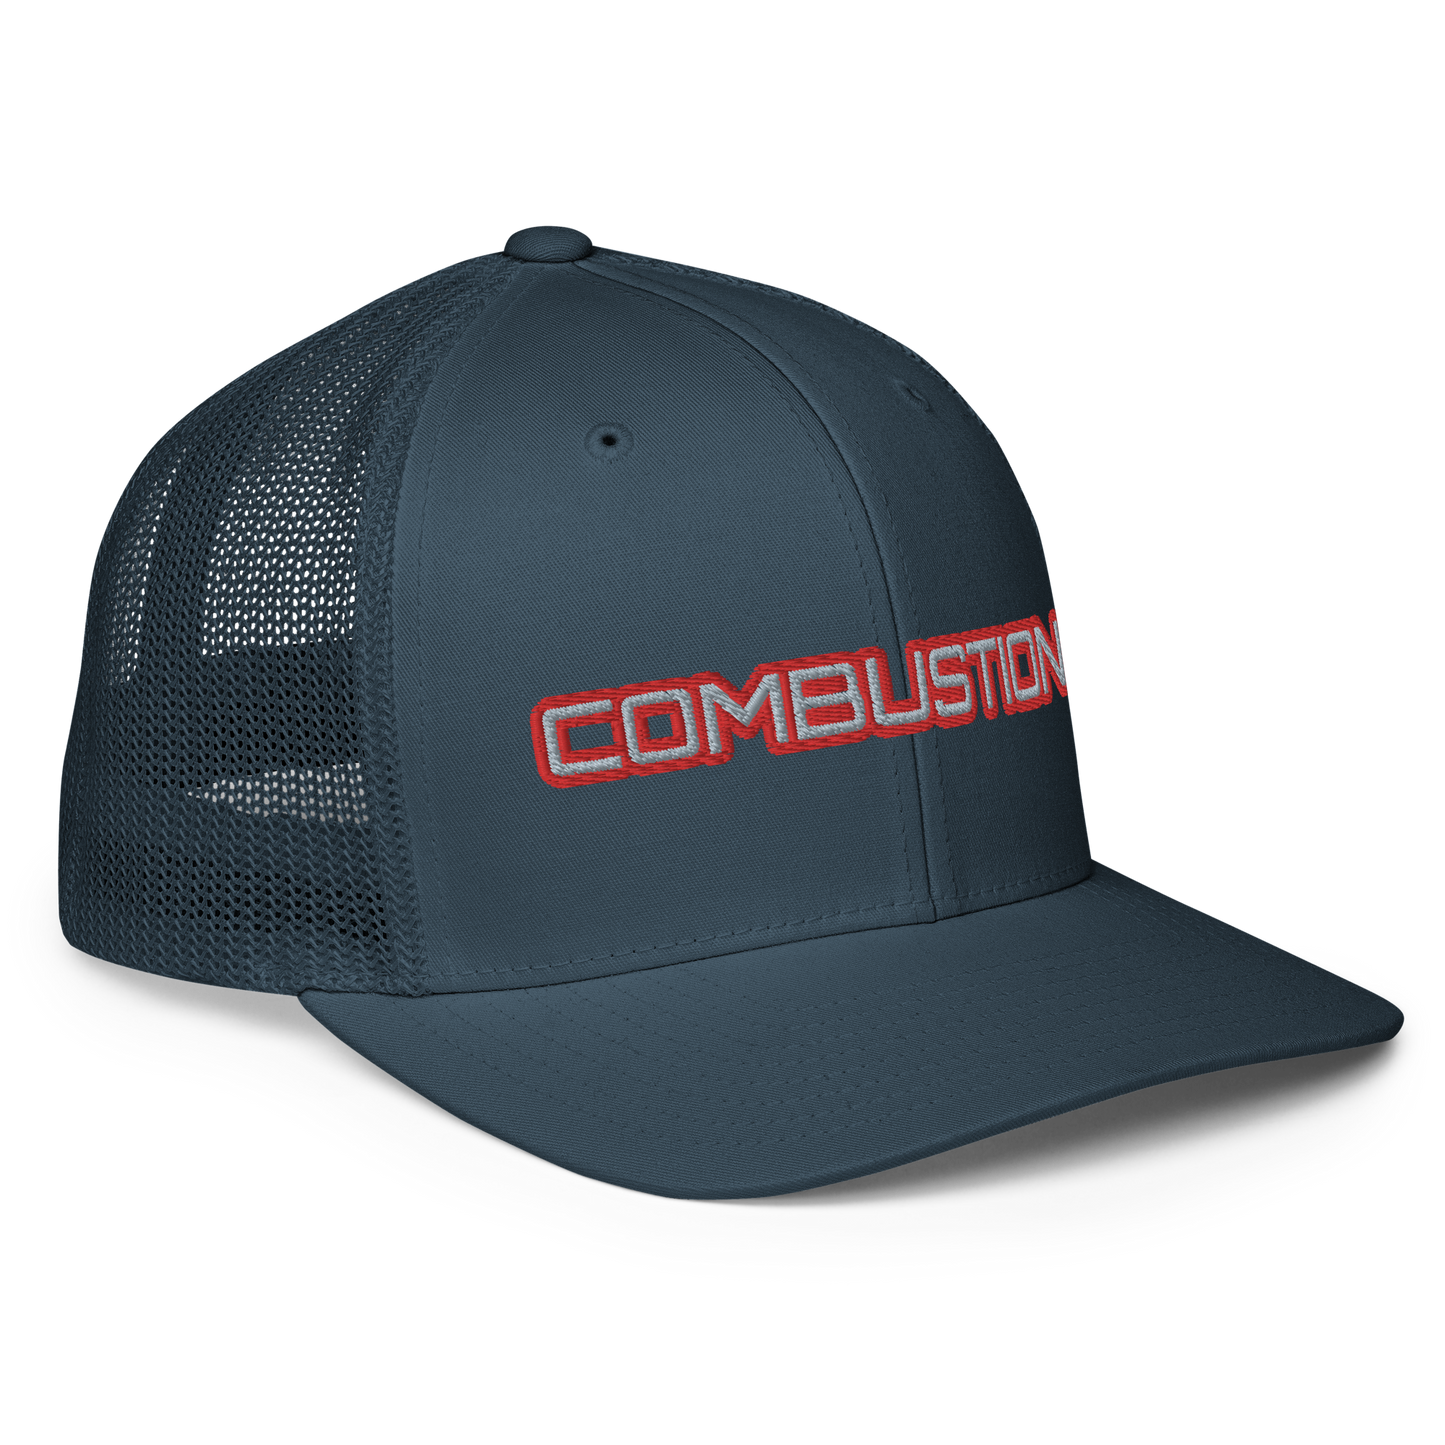 COMBUSTION HAT